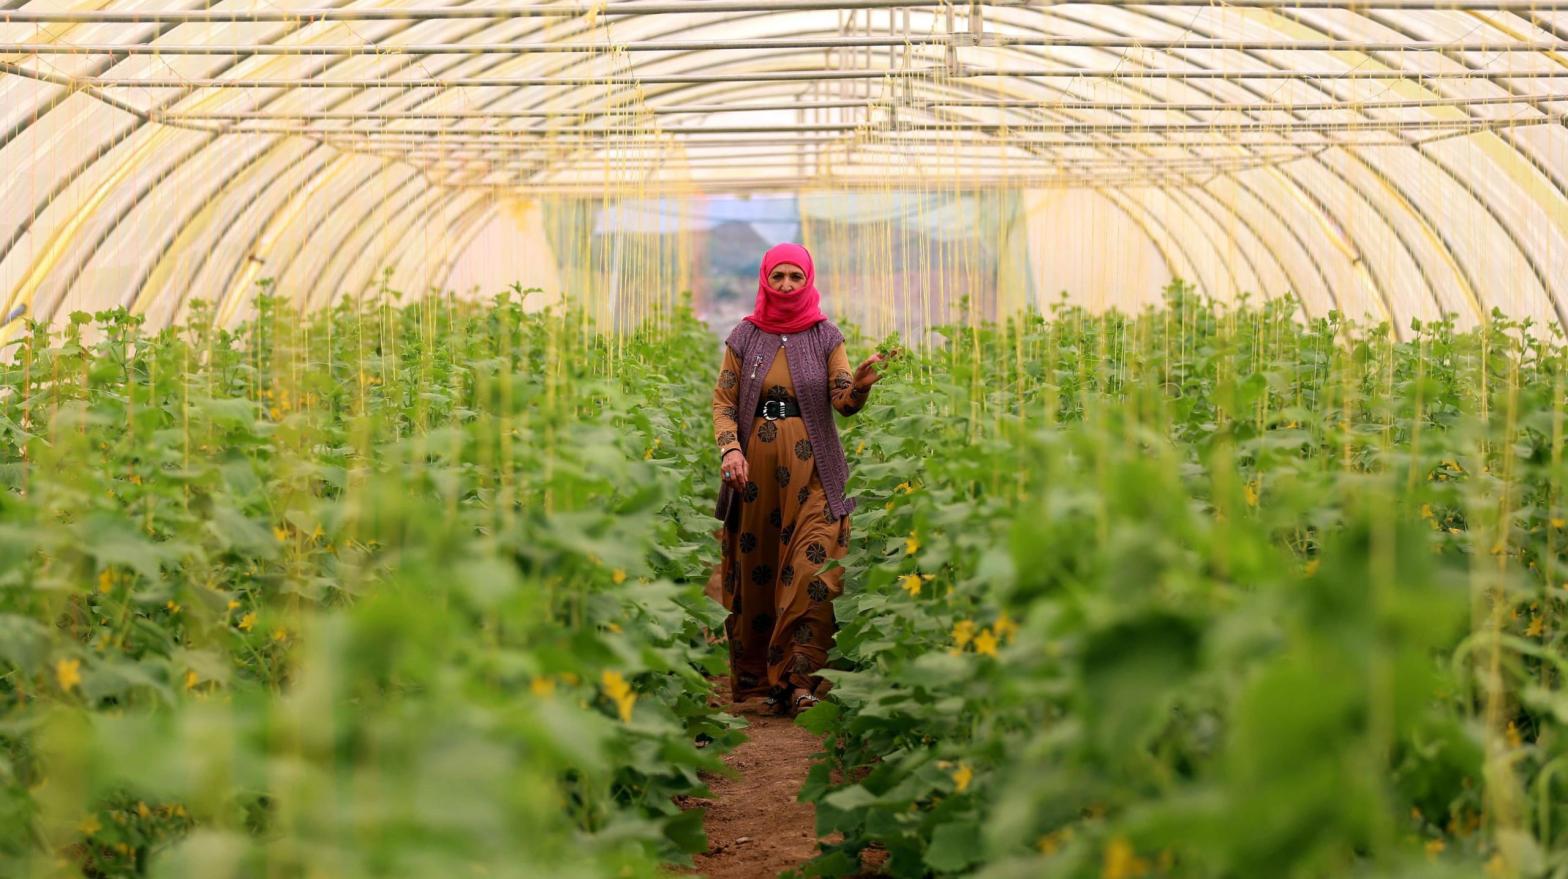 A displaced Iraqi woman, who fled violence in the northern city of Tal Afar, tends to the cucumber vines inside a plastic greenhouse at the Bahrka refugee camp located in the Kurdish autonomous region in northern Iraq on May 20, 2017. (Photo: Safin Hamed/AFP, Getty Images)